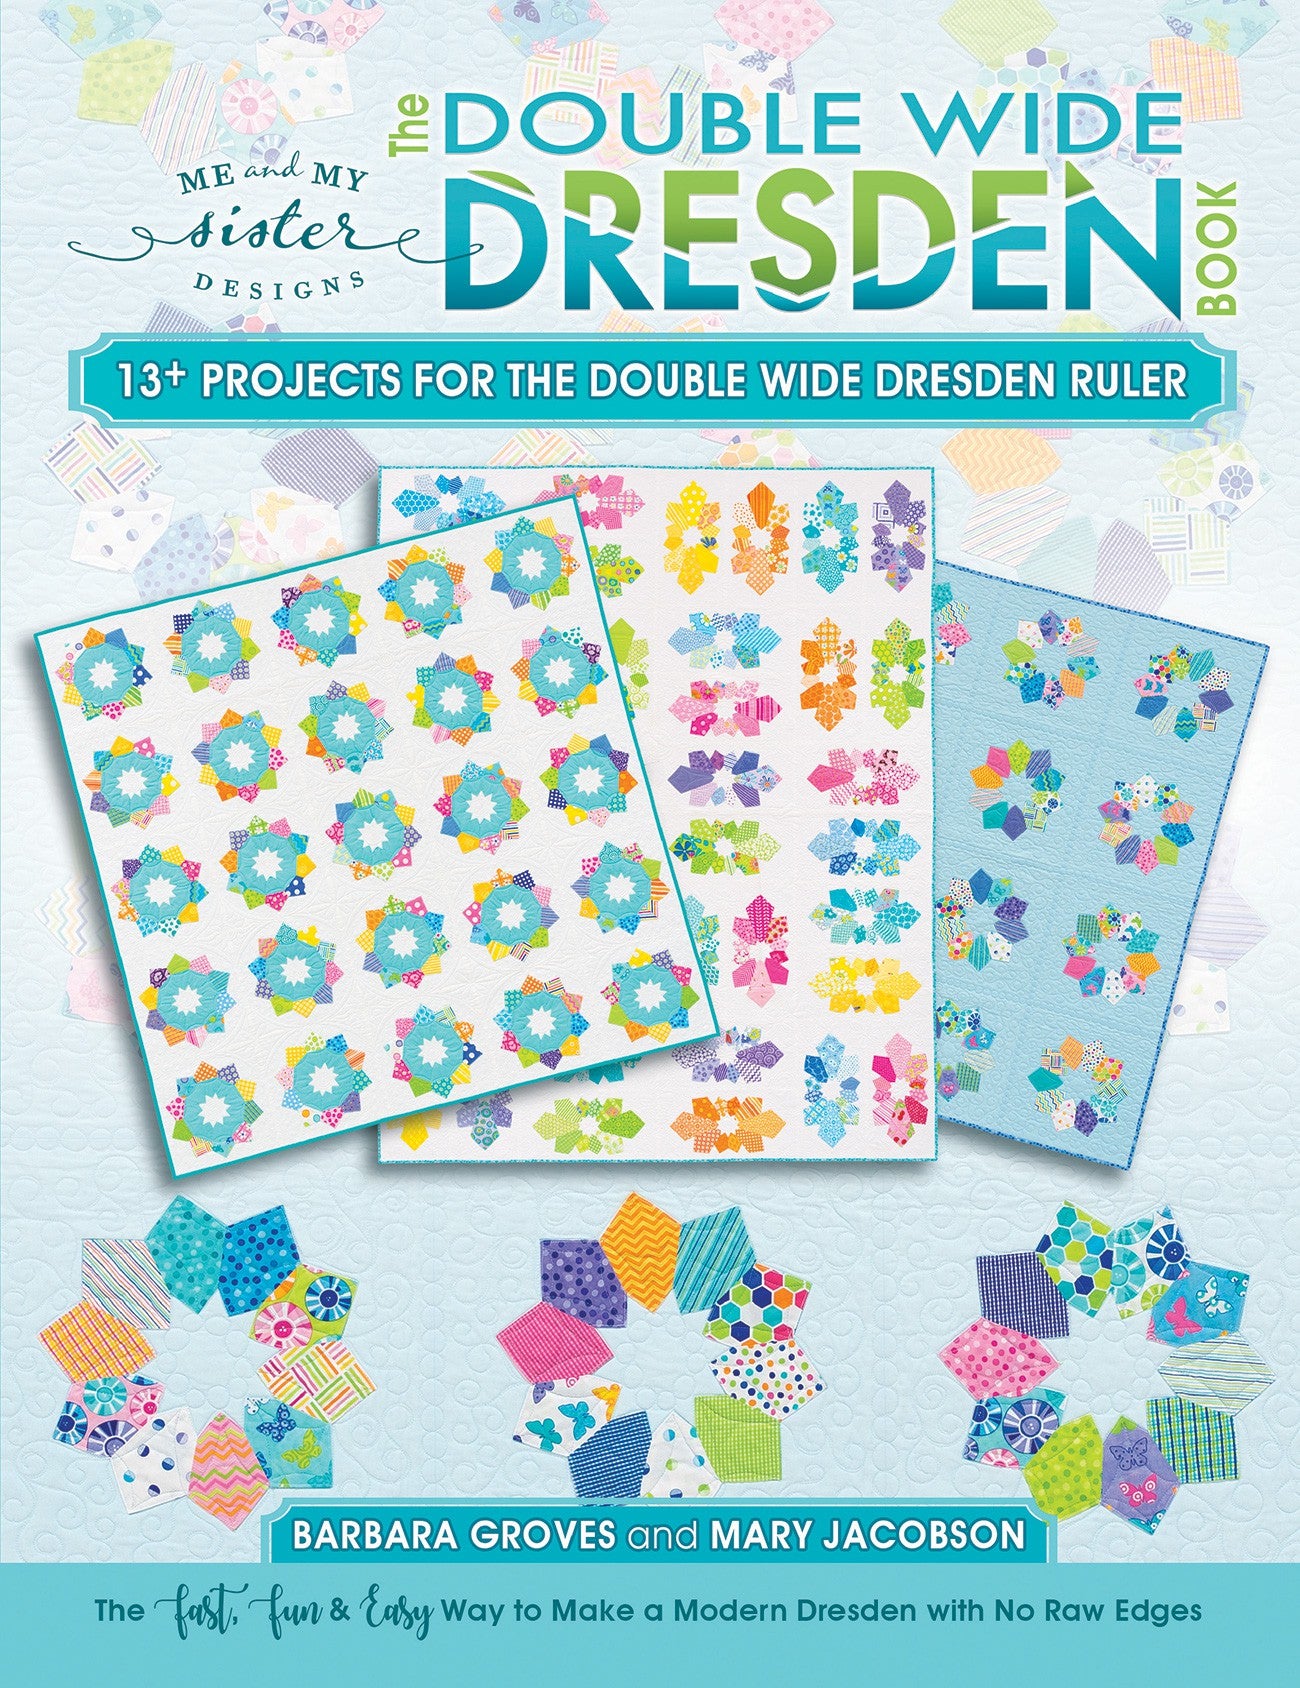 Double Wide Dresden Book by Mary Jacobson and Barbara Groves of Me and My Sister Designs